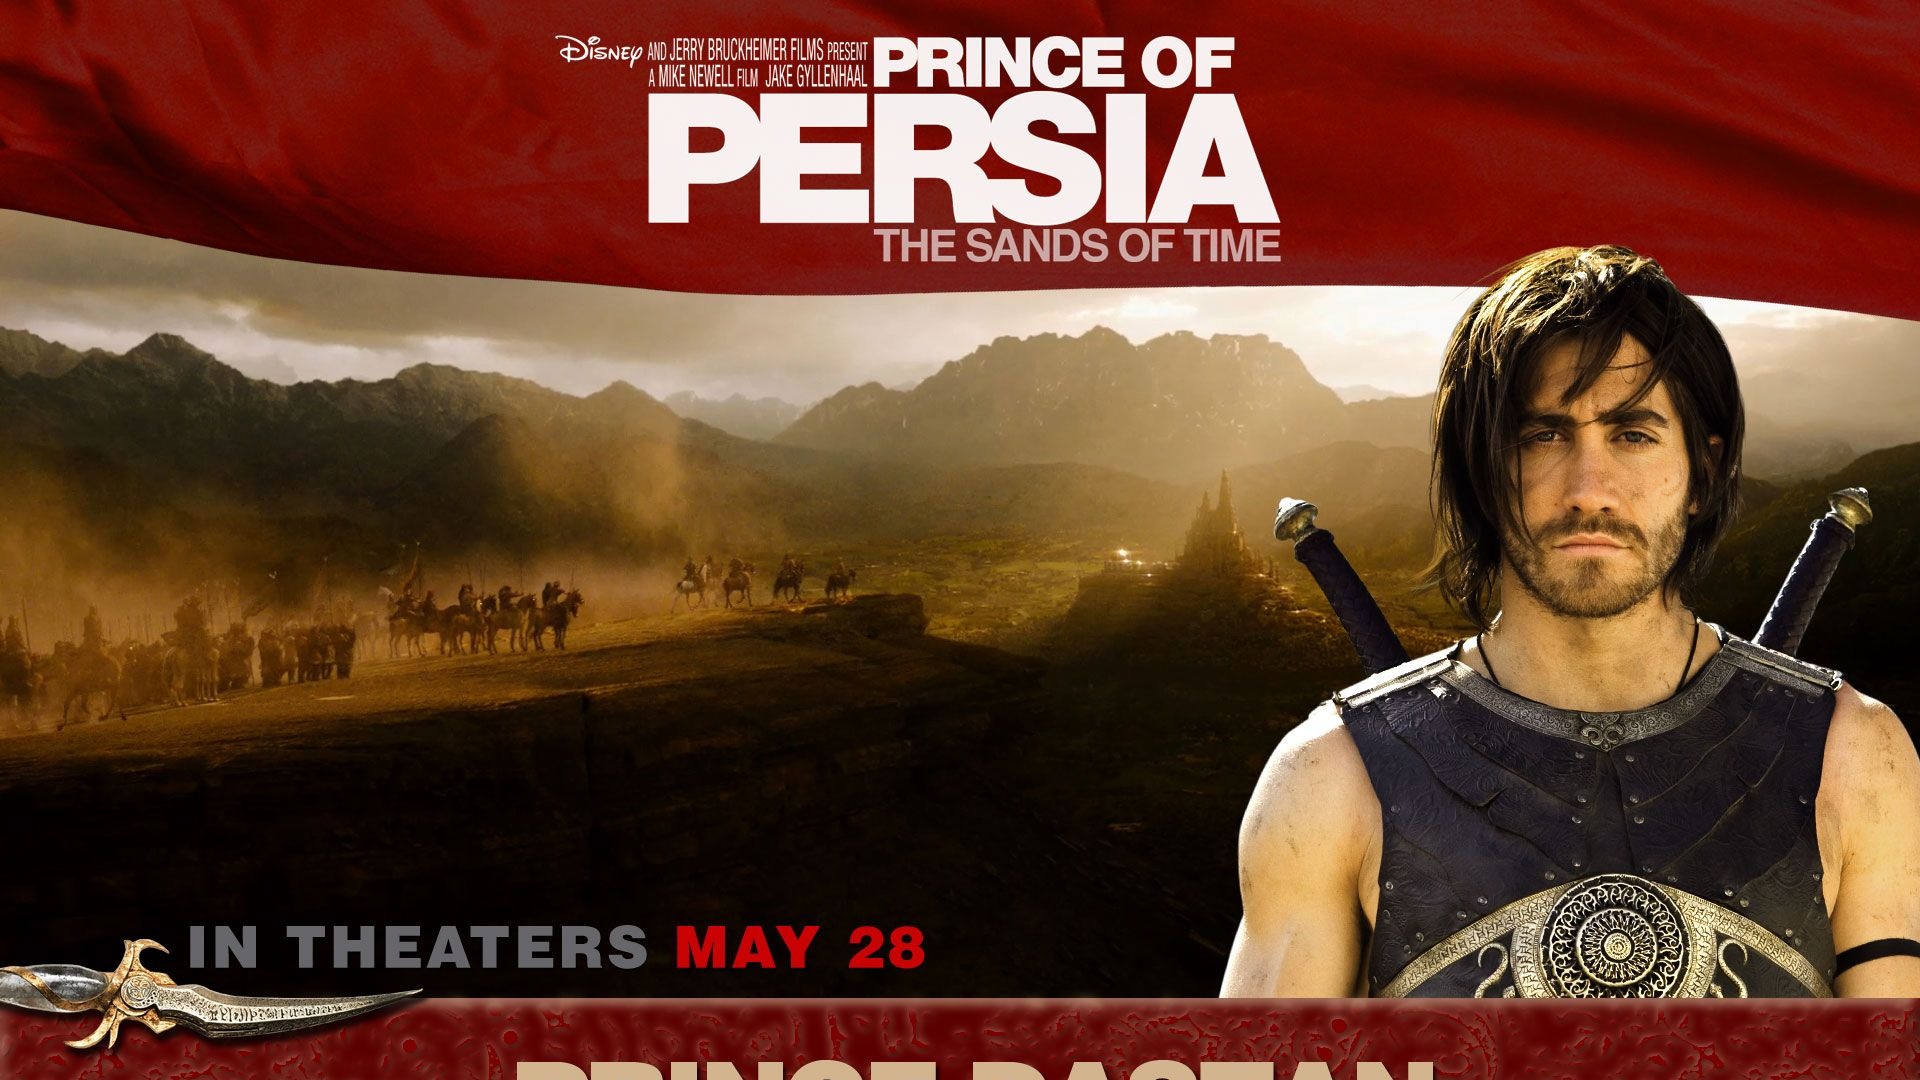 Prince of Persia The Sands of Time 波斯王子：时之刃1 - 1920x1080